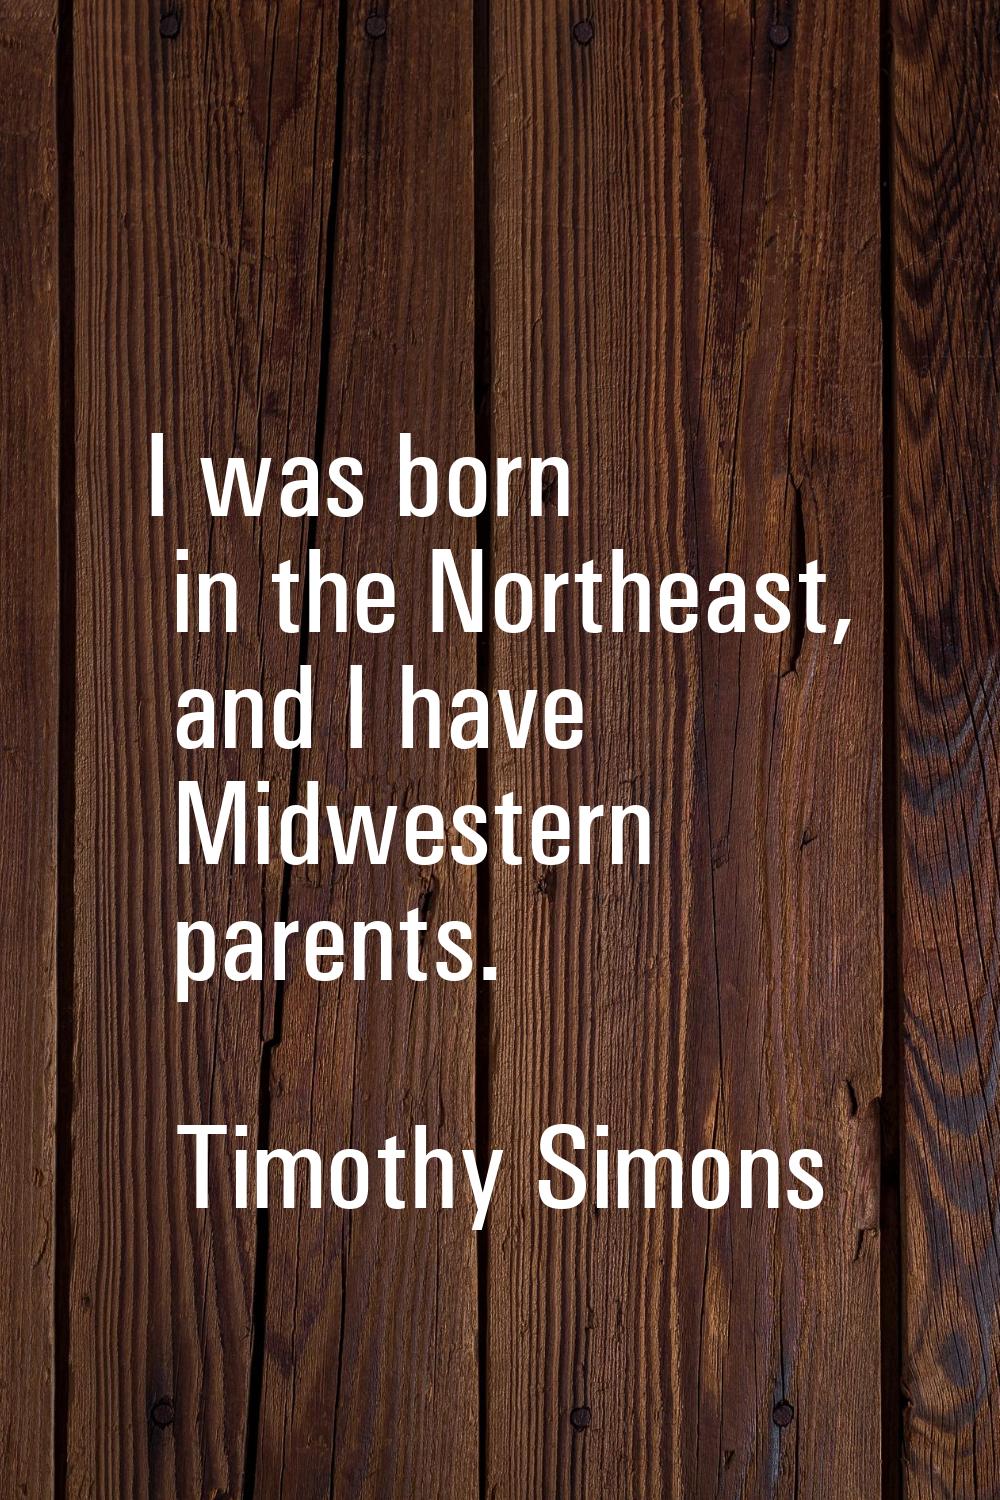 I was born in the Northeast, and I have Midwestern parents.